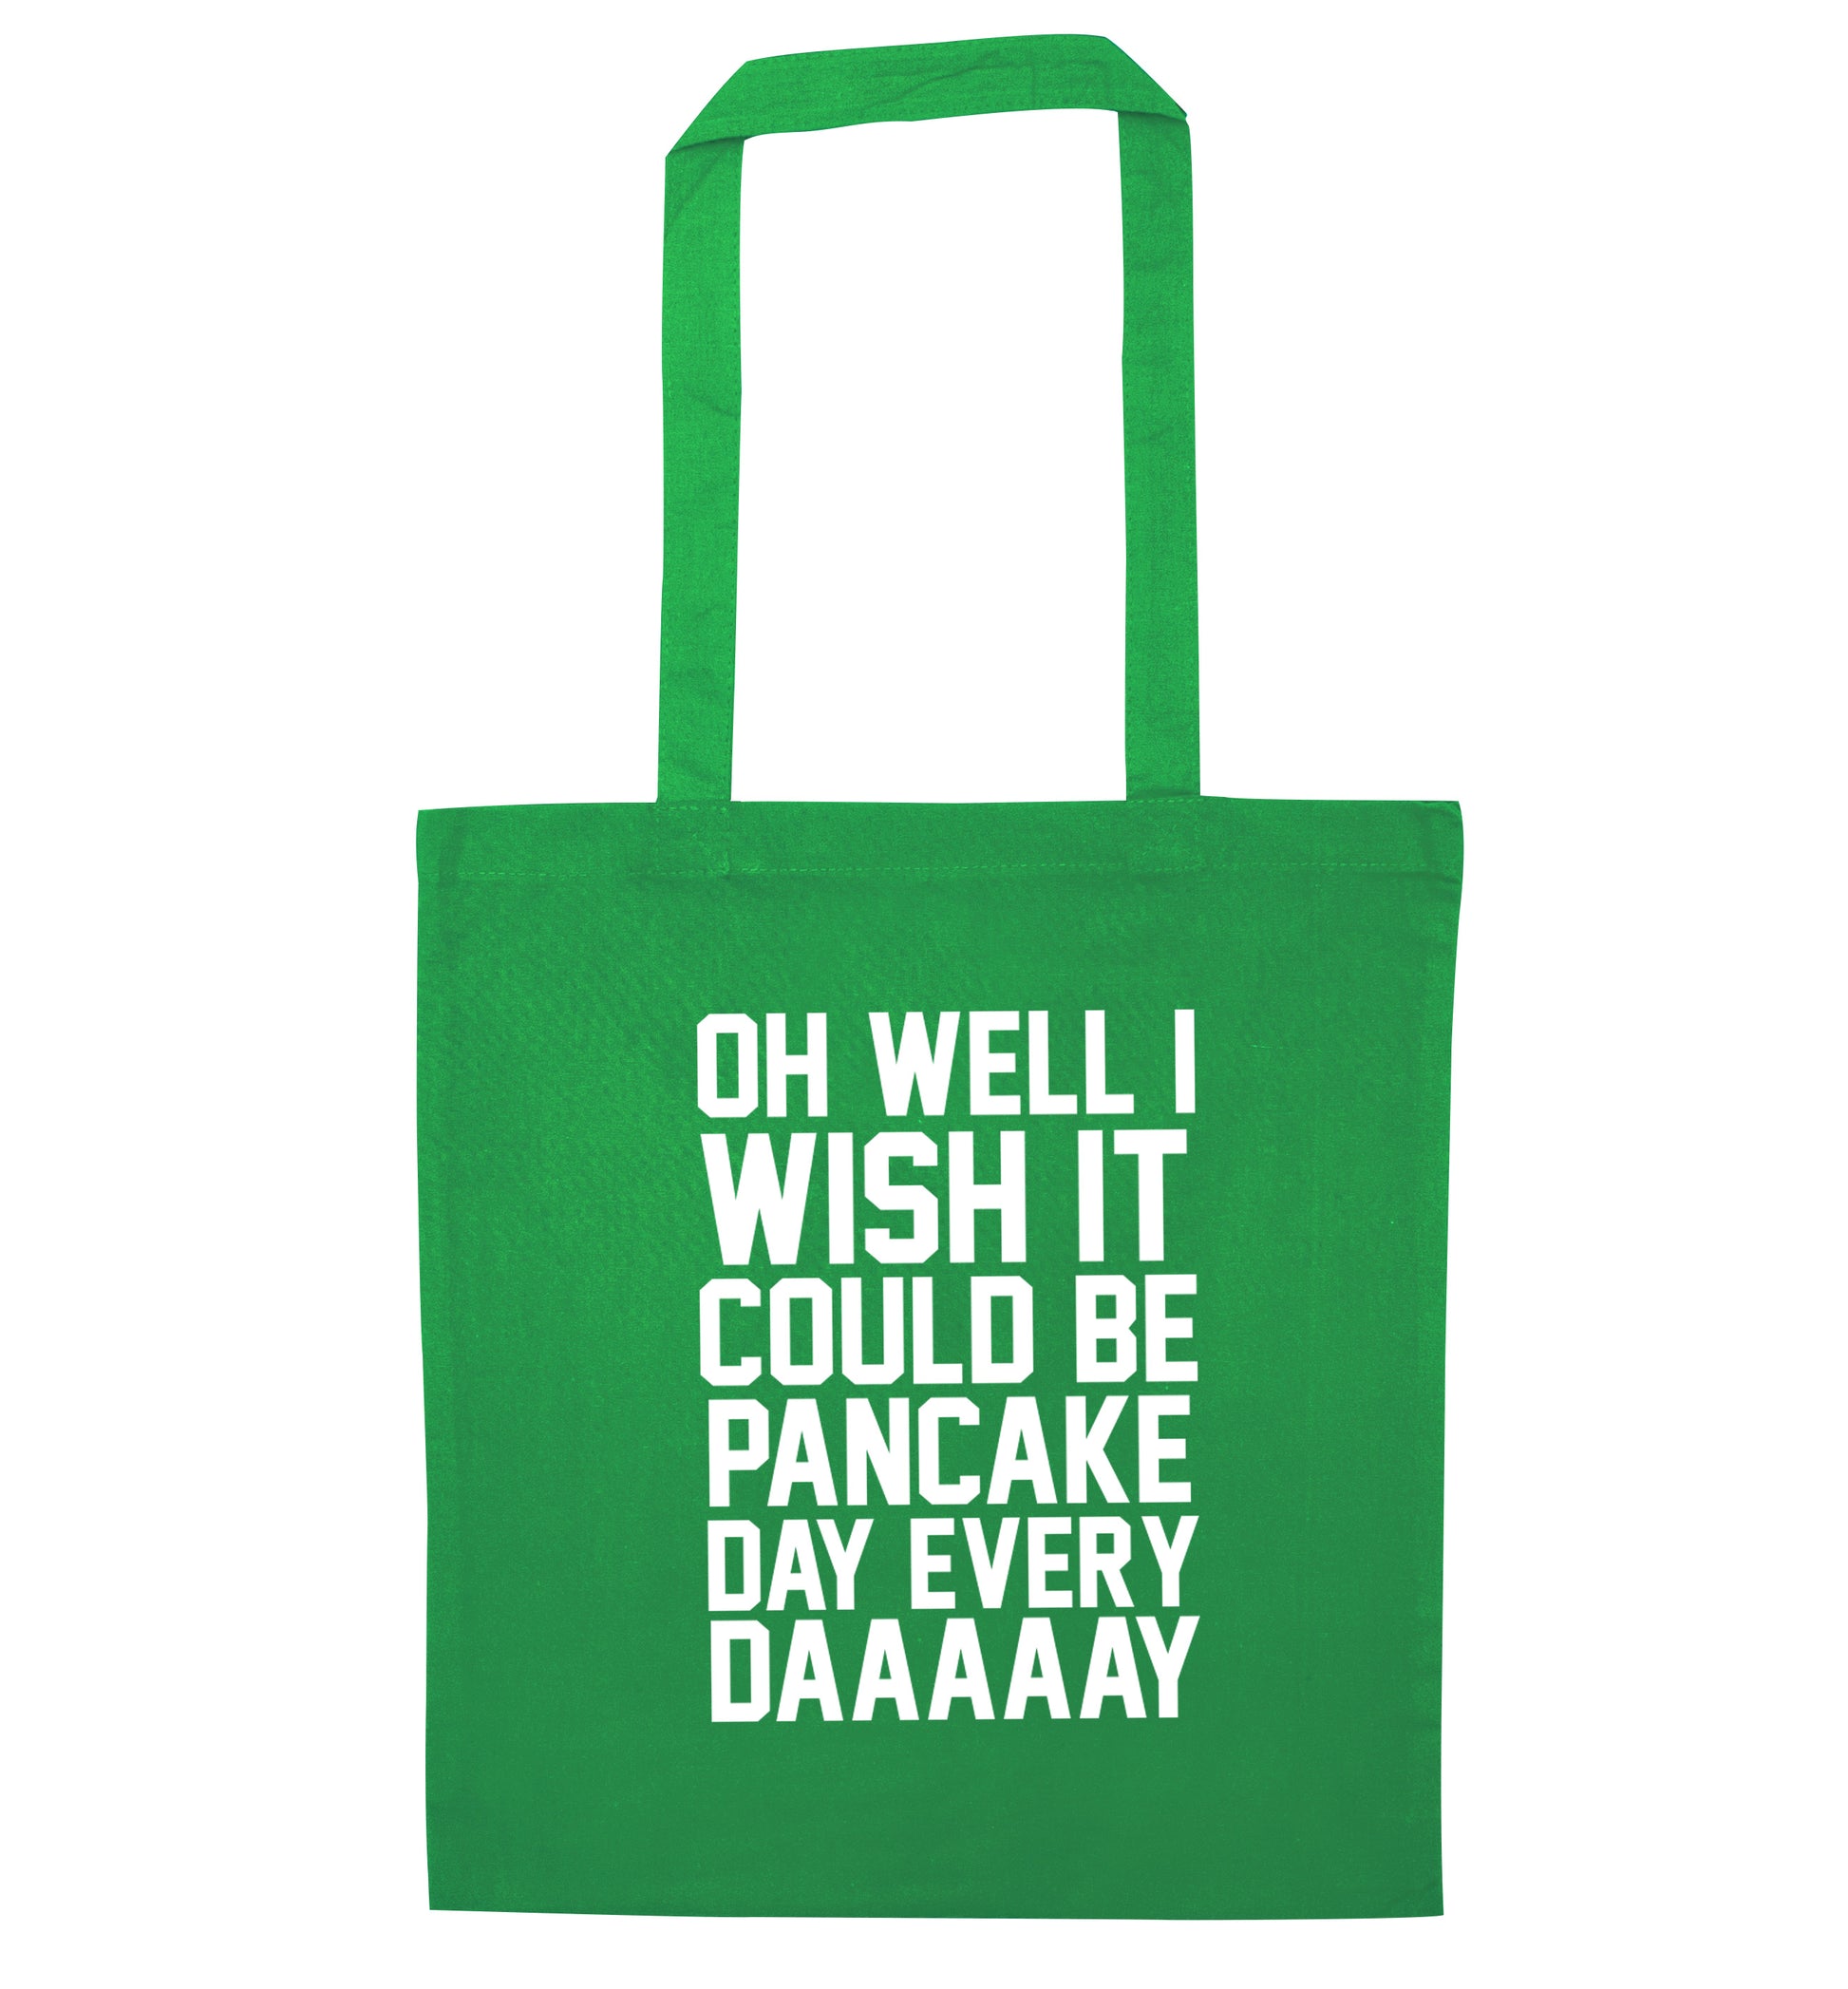 Oh well I wish it could be pancake day everyday green tote bag